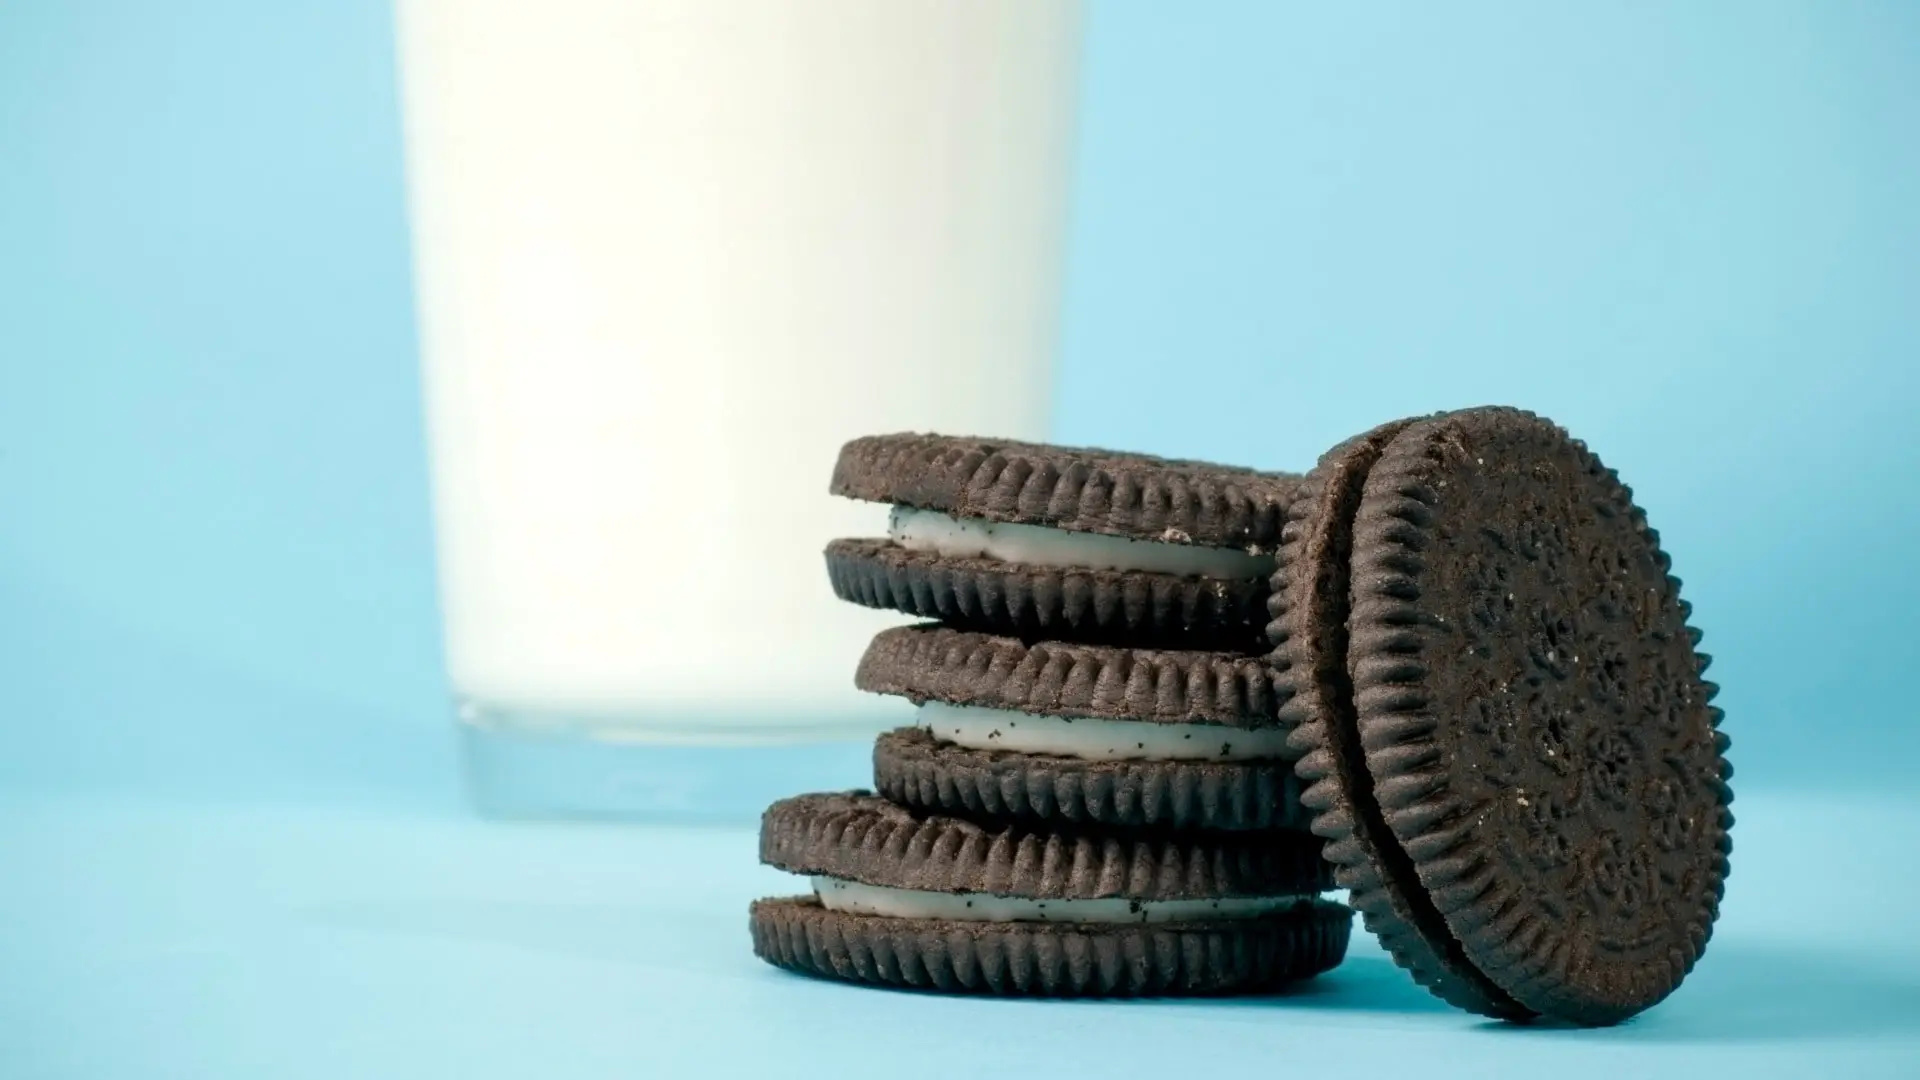 Oreo Cookies: Made of two chocolate-flavored biscuits with cream between. 1920x1080 Full HD Wallpaper.